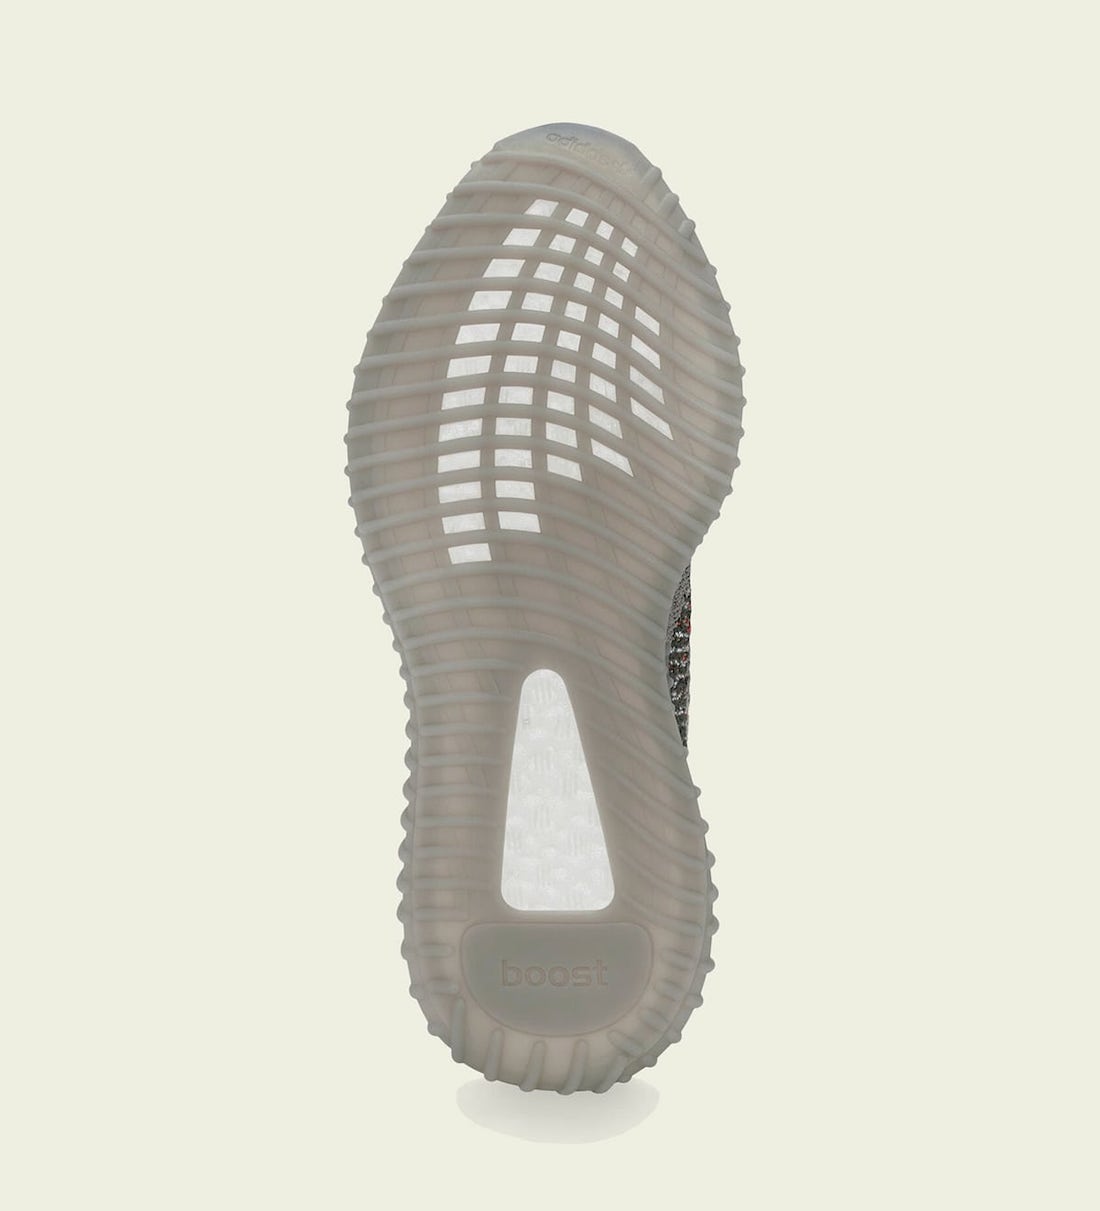 adidas Yeezy Boost 350 V2 Beluga Reflective GW1229 Release Date Price 4